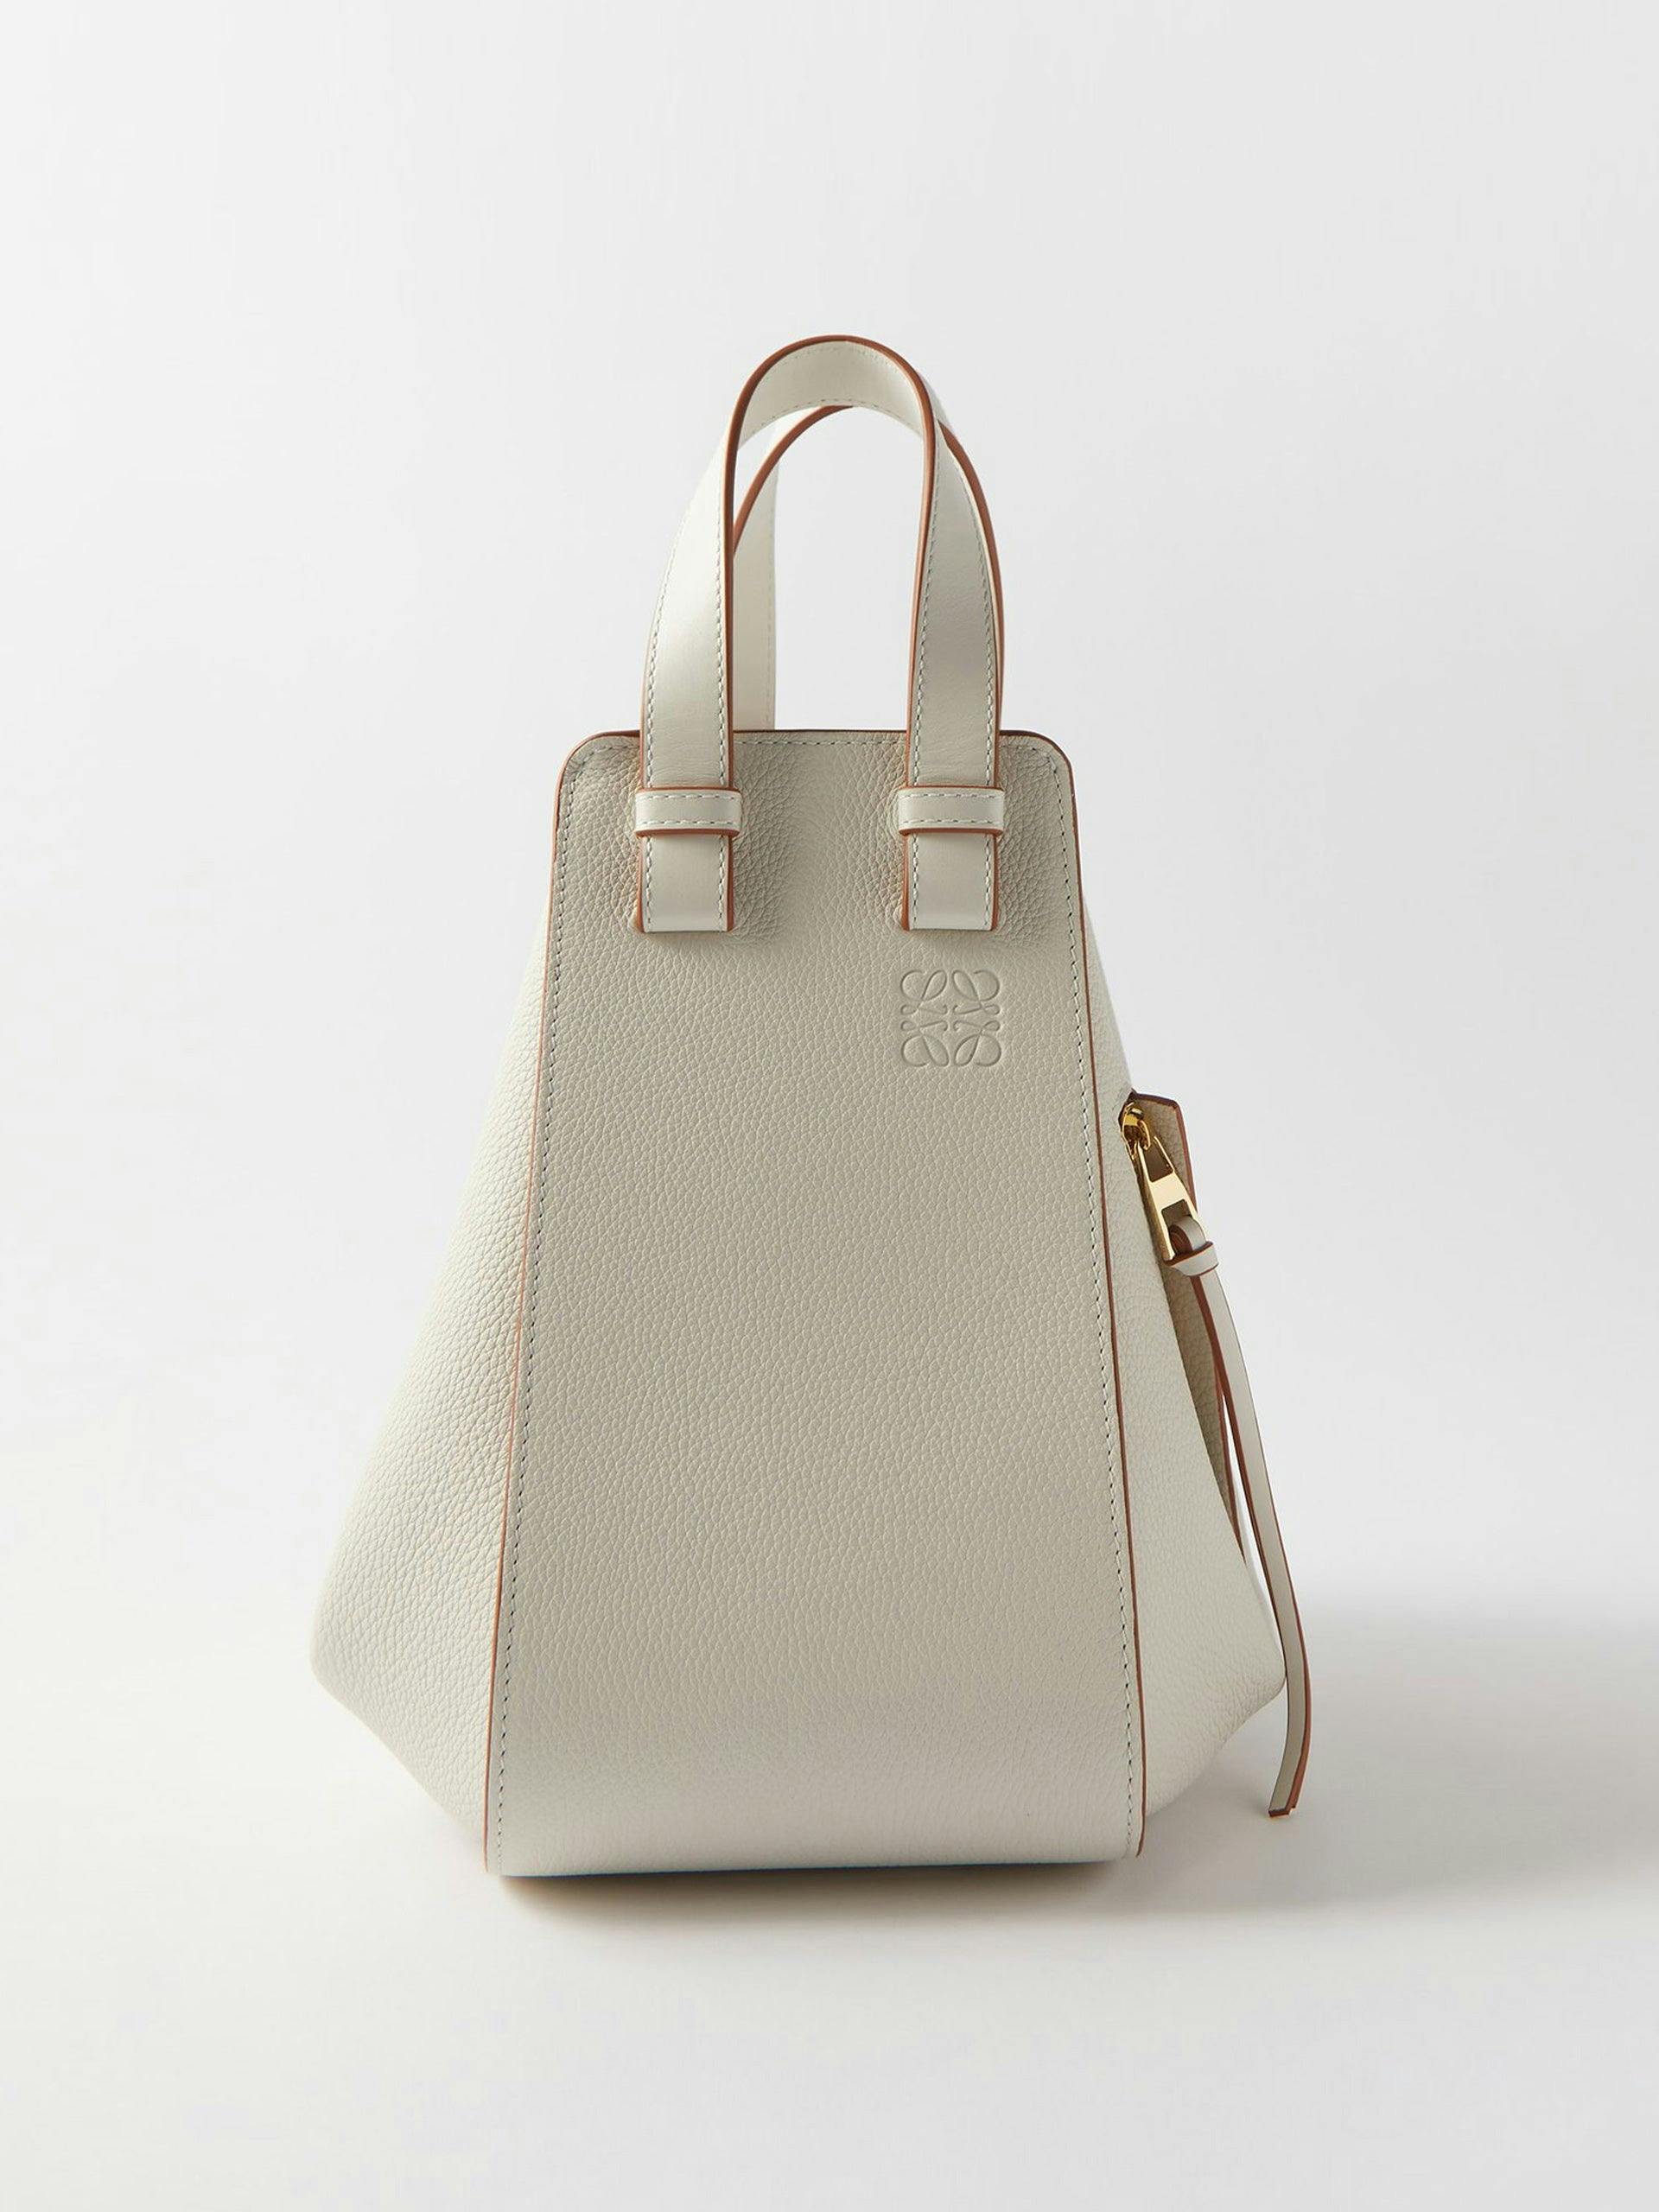 White grained leather bag